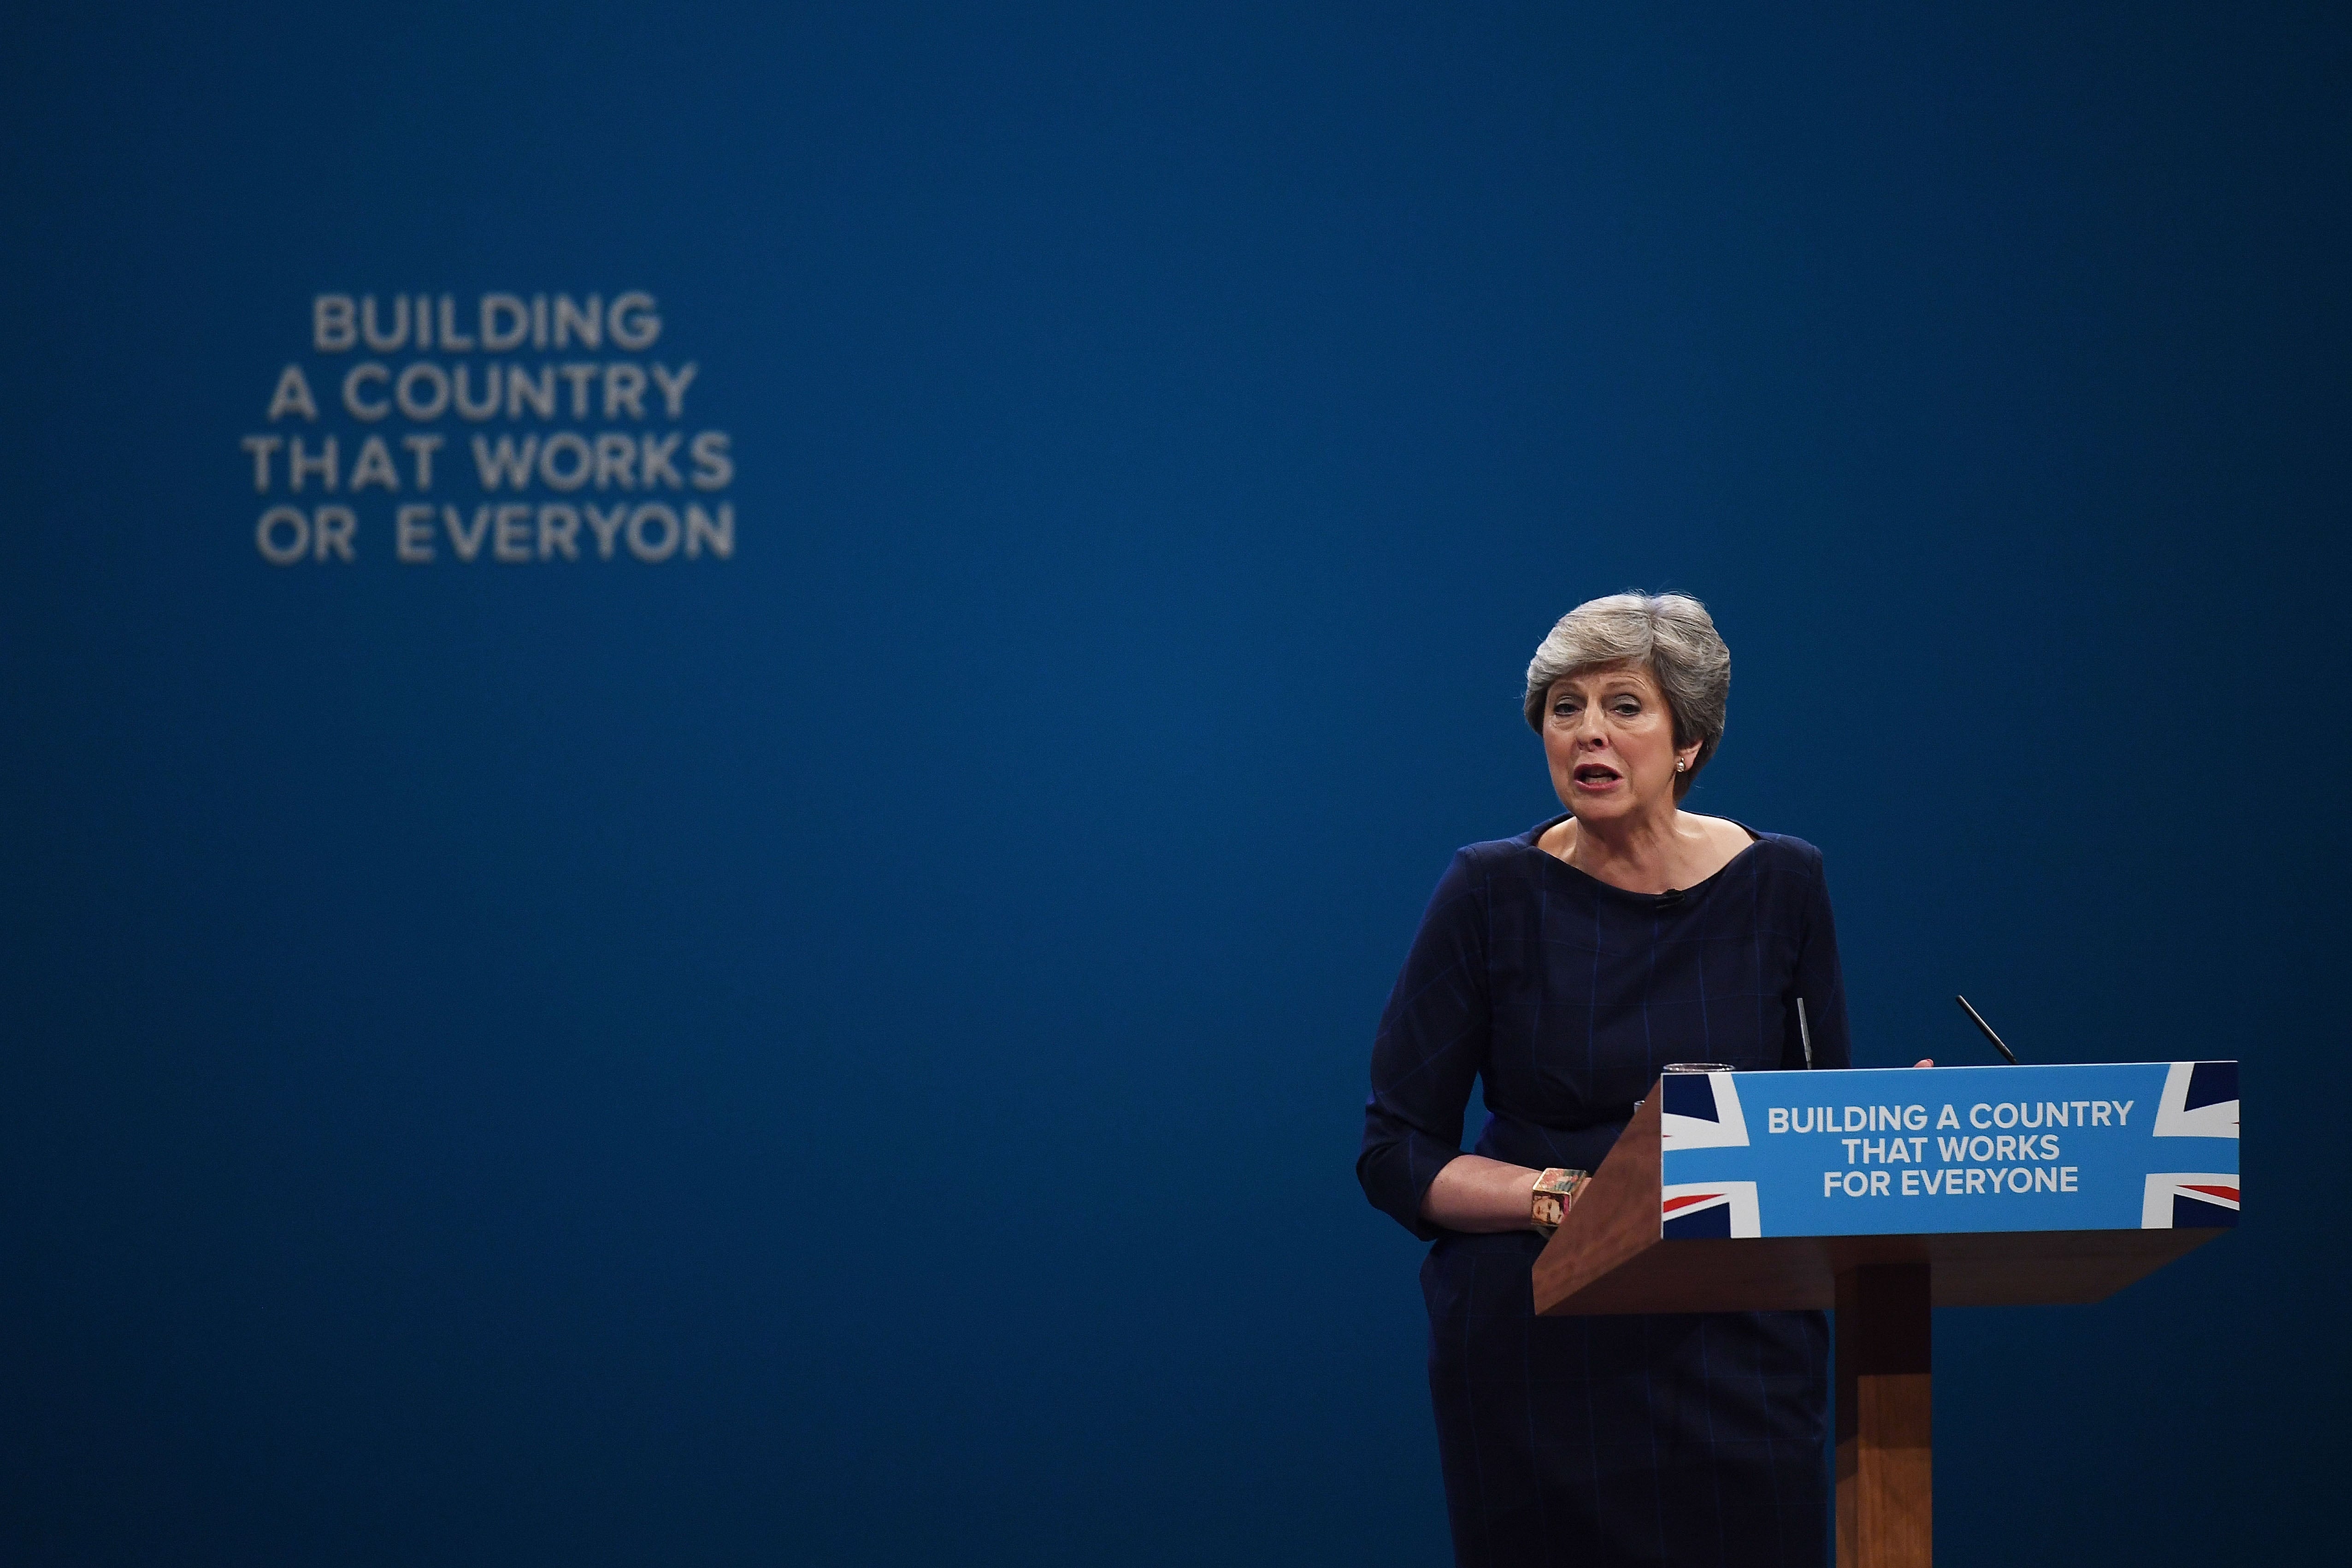 Tory leaders are haunted by Theresa May’s experience, when the letter on the wall behind her began to fall off during her speech